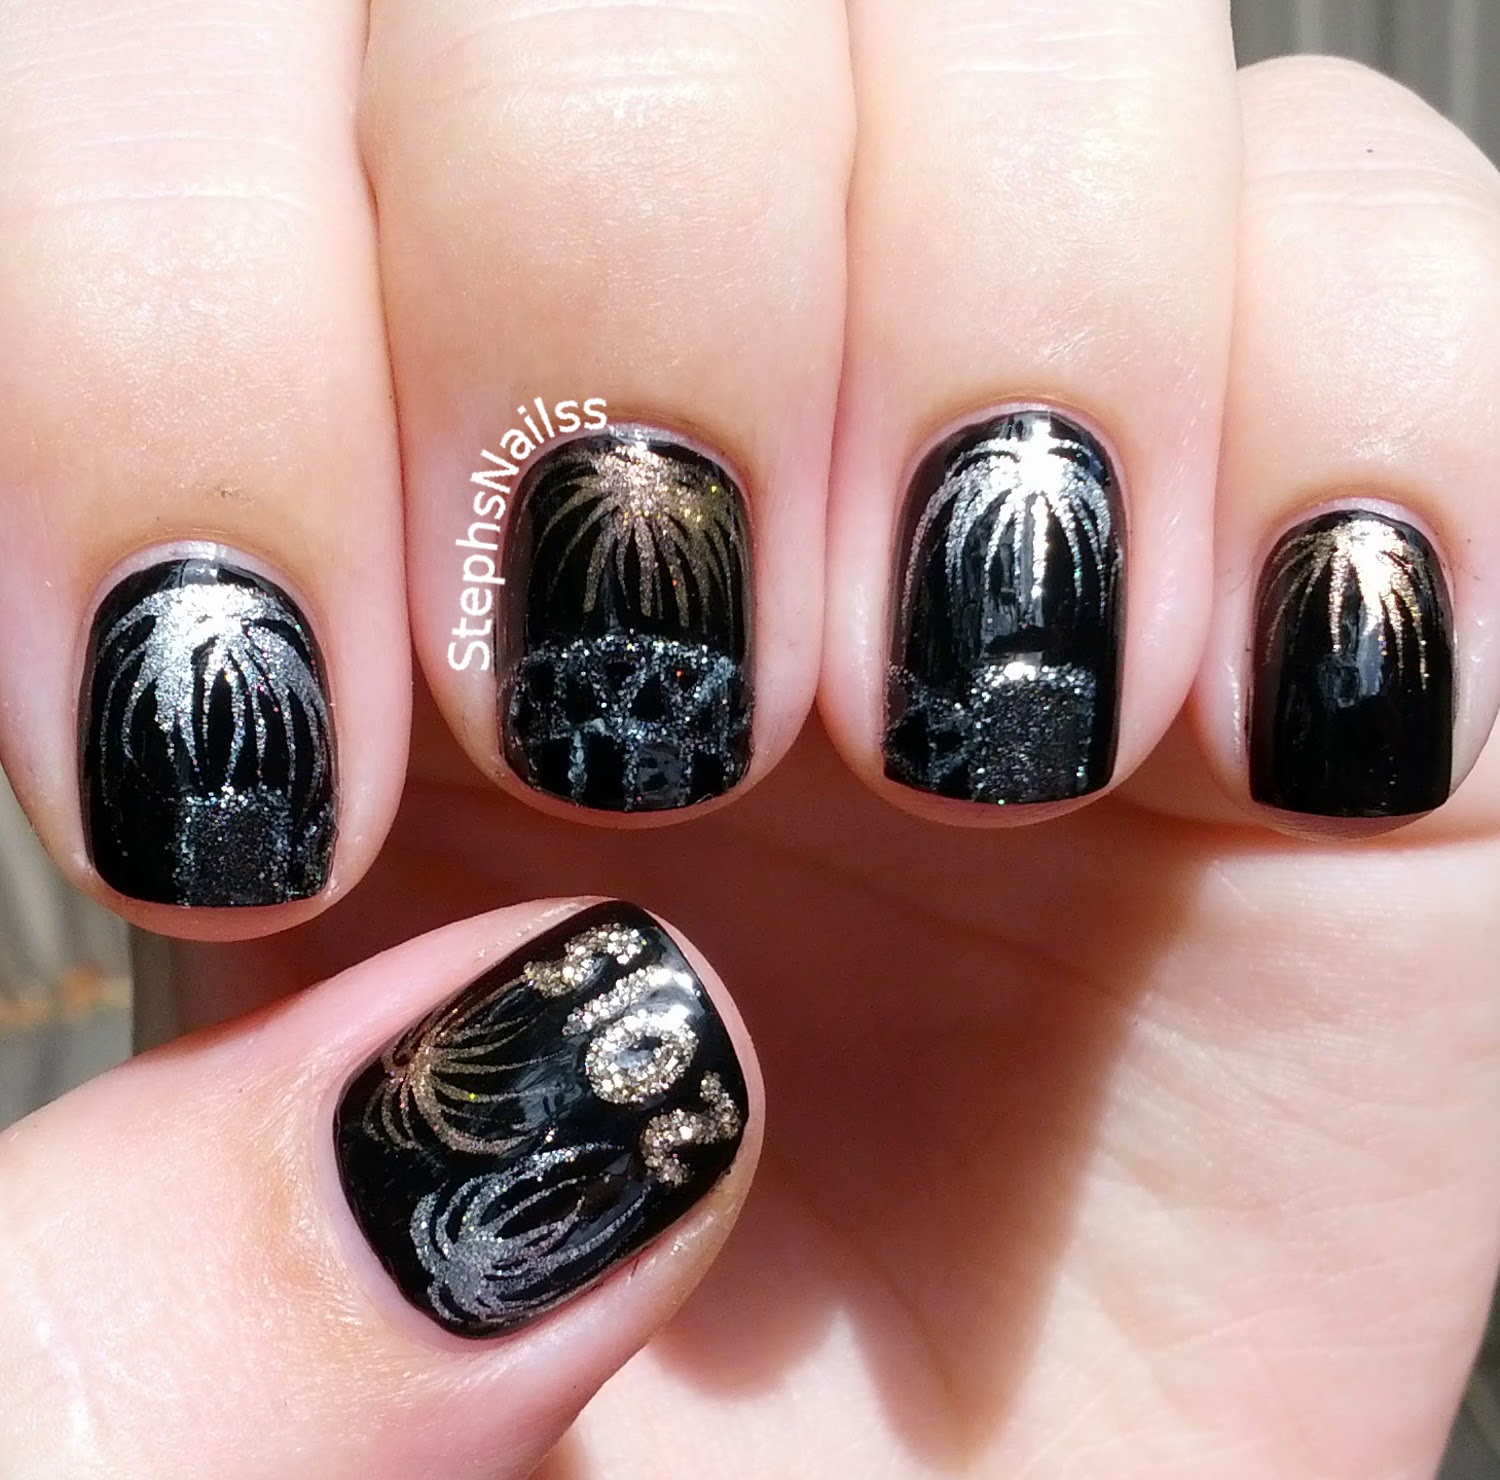 StephsNailss New Years Nails!